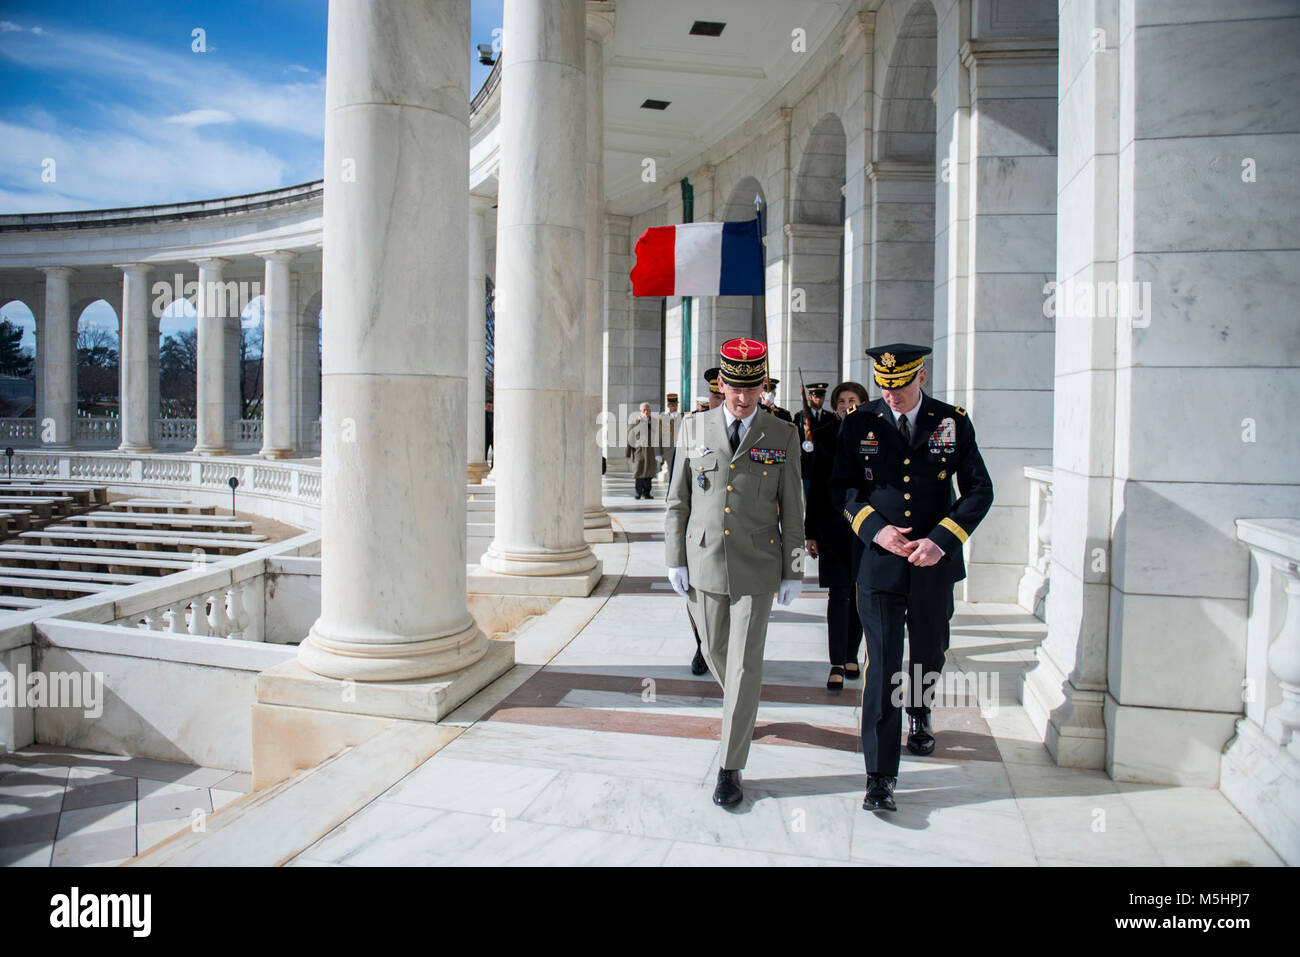 Gen. François Lecointre (left), chief of the defence staff, French Armed Forces; and Maj. Gen. John P. Sullivan (right), assistant deputy chief of staff, G-4; walk through the Memorial Amphitheater at Arlington National Cemetery, Arlington, Virginia, Feb. 12, 2018. Lecointre visited ANC as part of his first official visit, touring the Memorial Amphitheater Display Room and participating in an Armed Forces Full Honors Wreath-Laying Ceremony at the Tomb of the Unknown Soldier. (U.S. Army Stock Photo